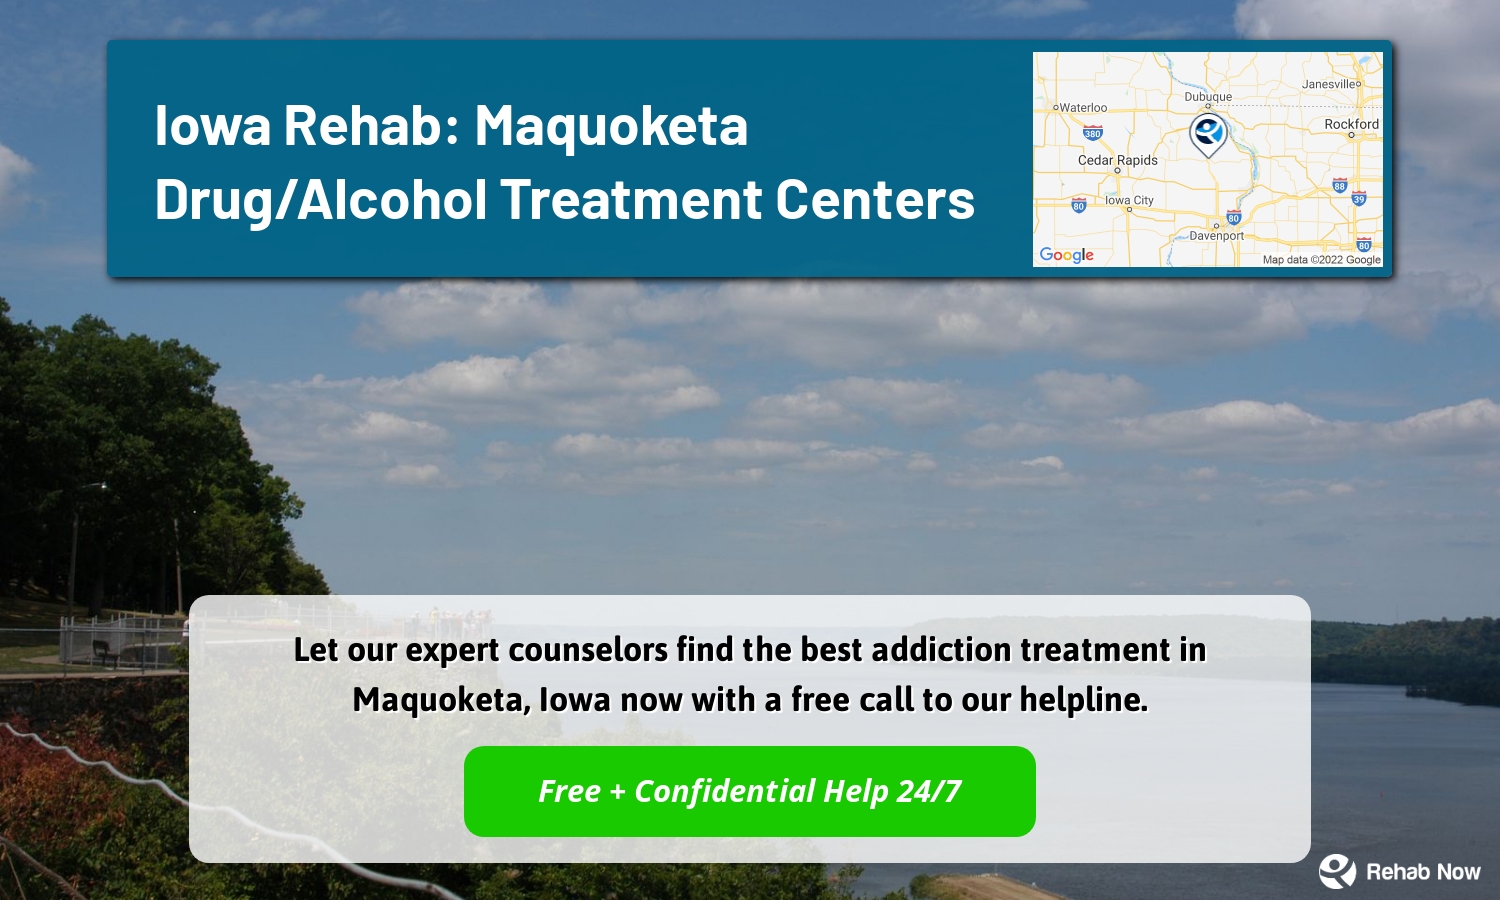 Let our expert counselors find the best addiction treatment in Maquoketa, Iowa now with a free call to our helpline.